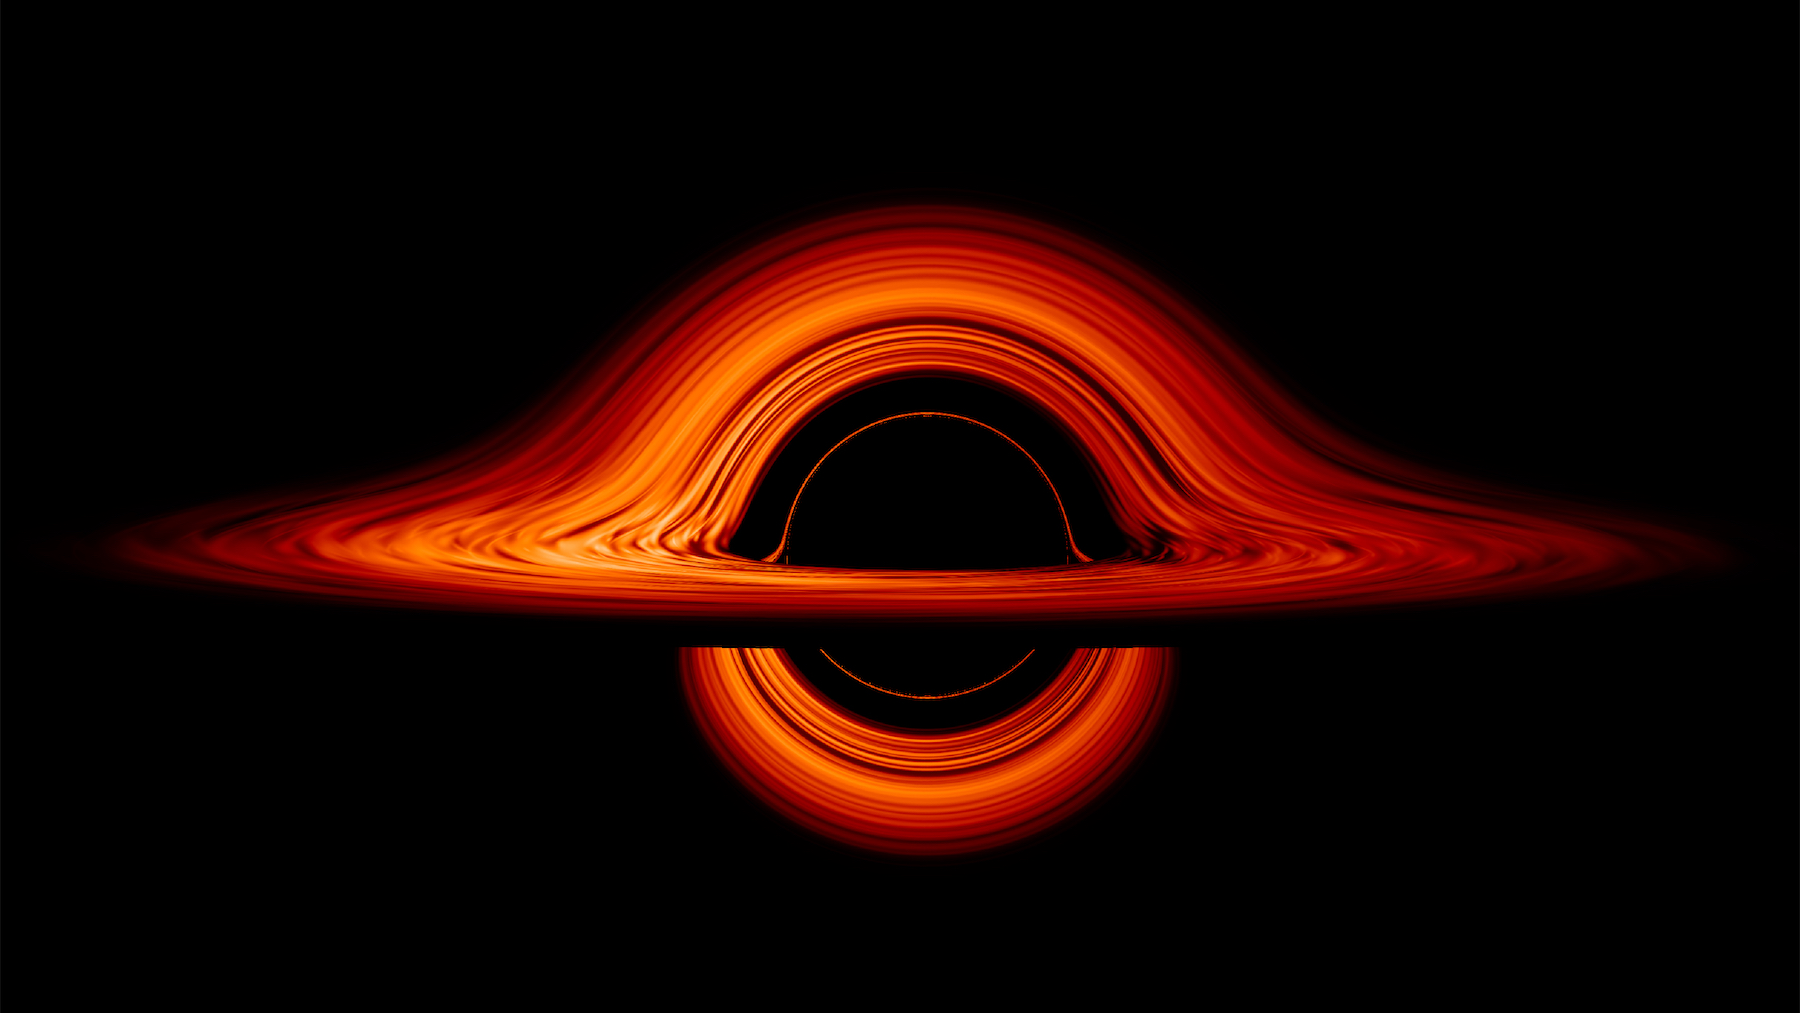 a computer rendering of a black hole showing the intense bend of orange-shaded gas curving in a ring-like shape of a large ominous black space. there is no escape